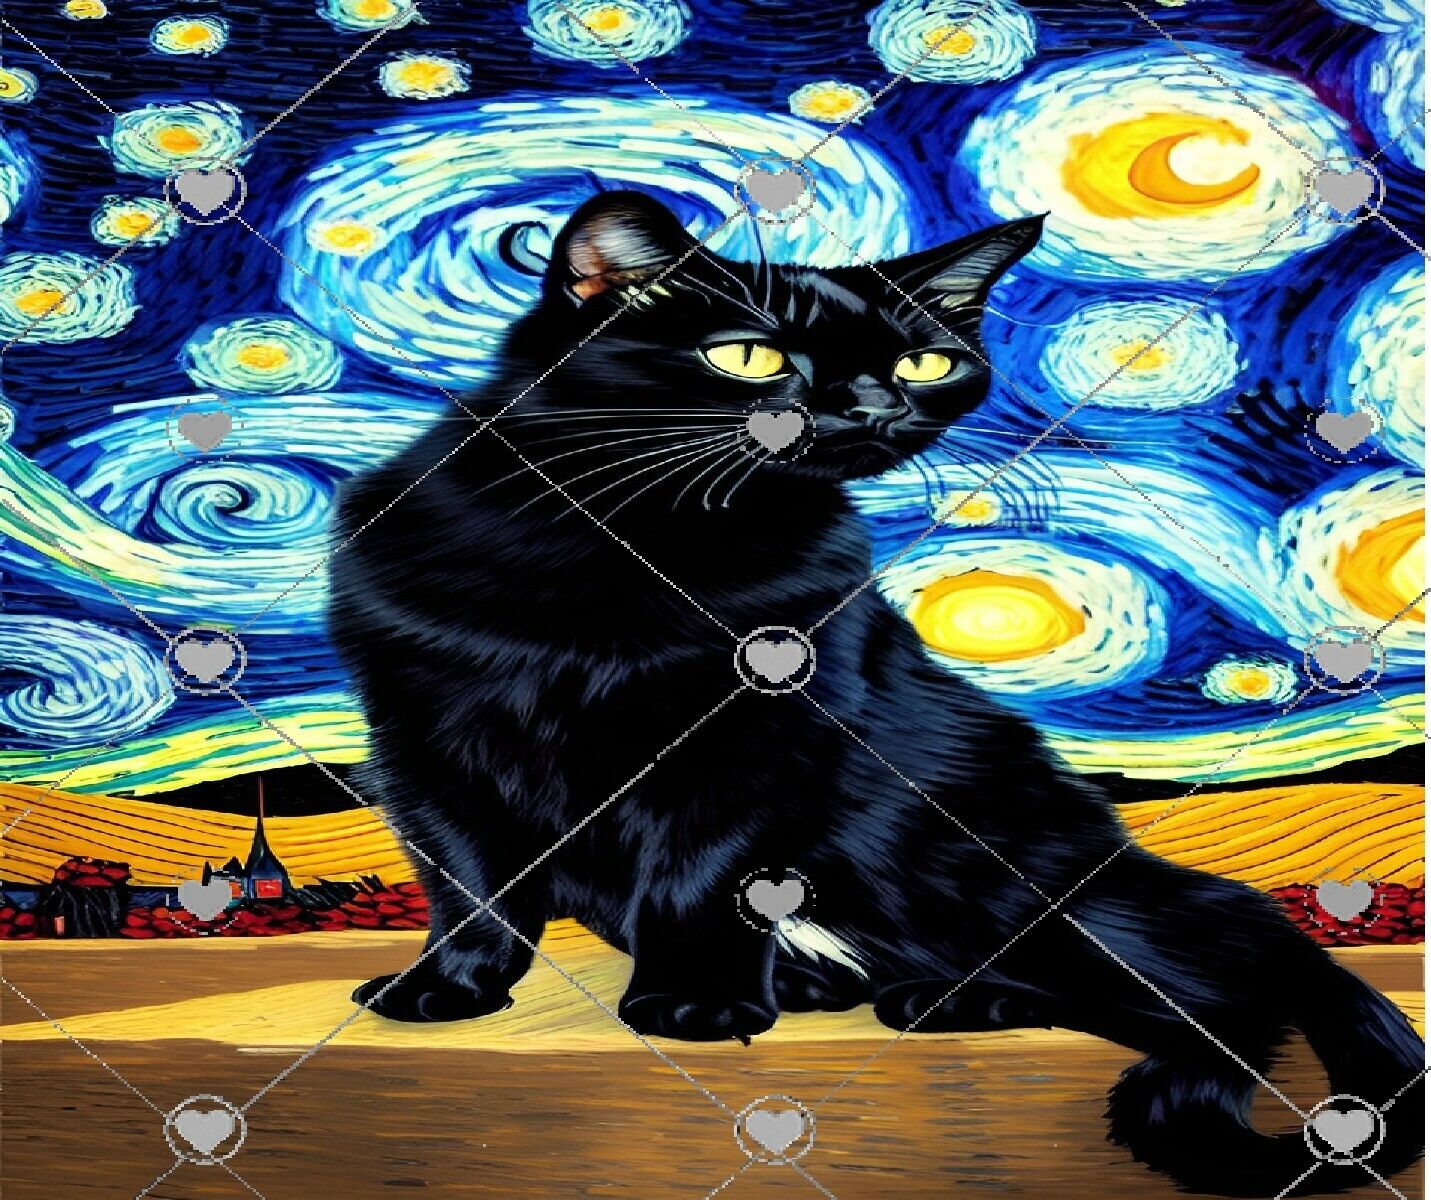 BLACK CAT STARRY NIGHT VAN  GOGH STYLE  COMPUTER MOUSE PAD  9 x 7